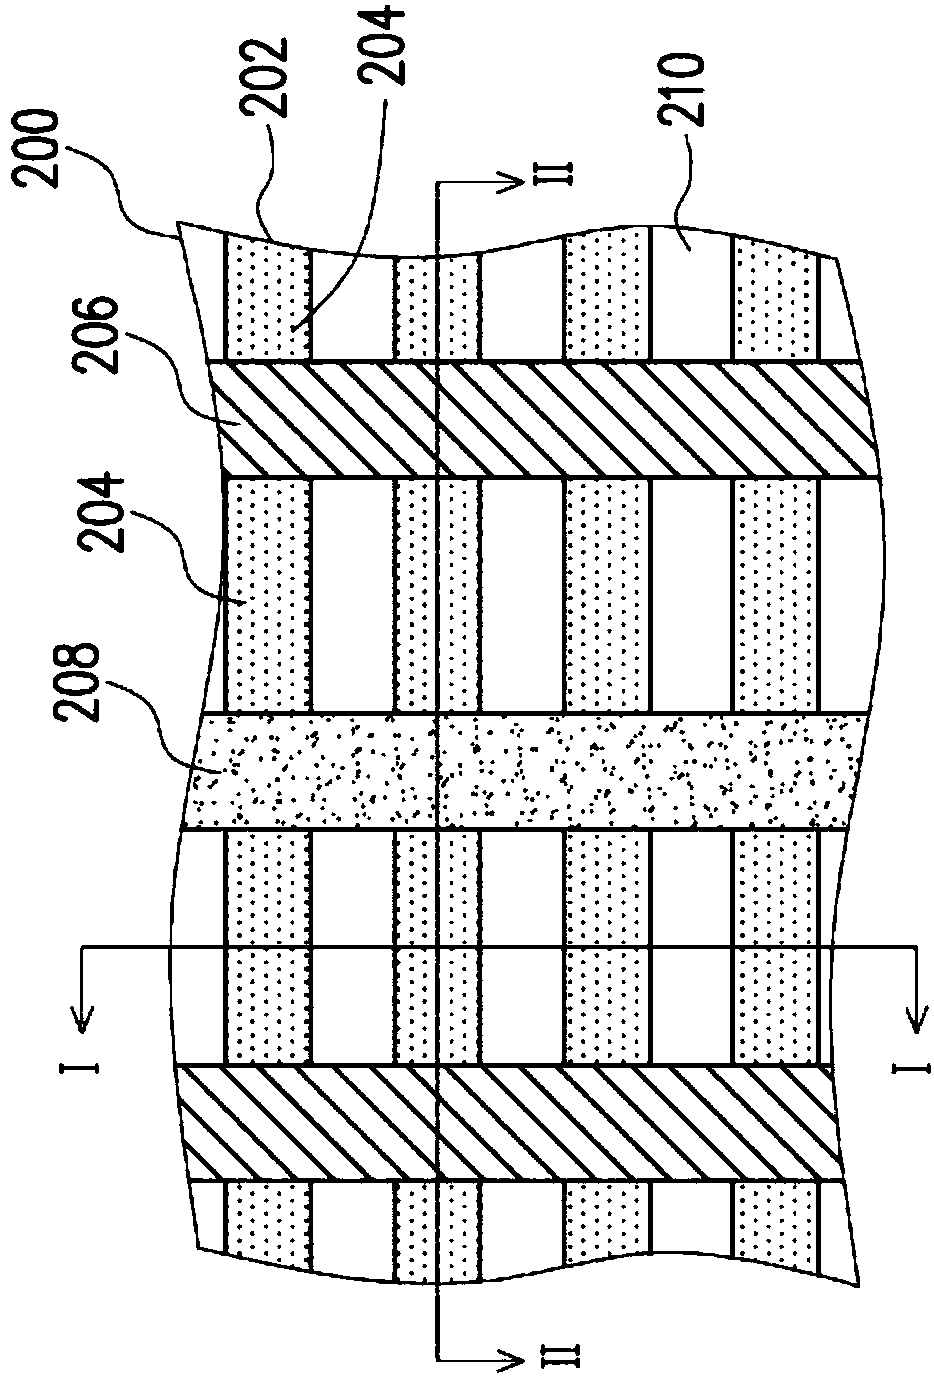 Isolation structure and method for fabricating same